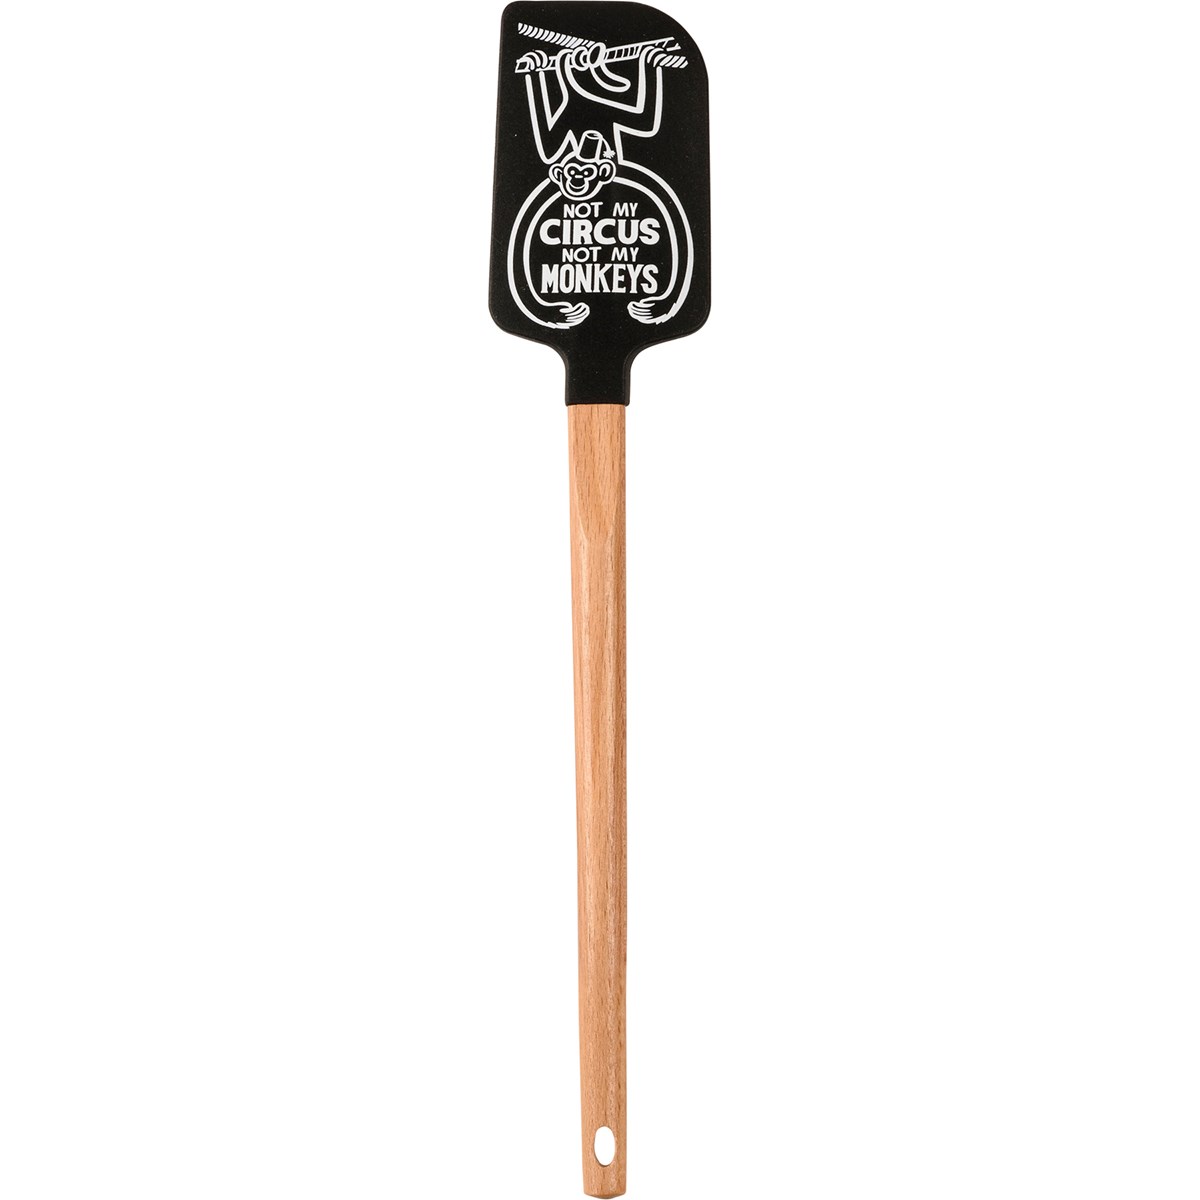 Not My Circus Not My Monkeys Spatula - Silicone, Wood